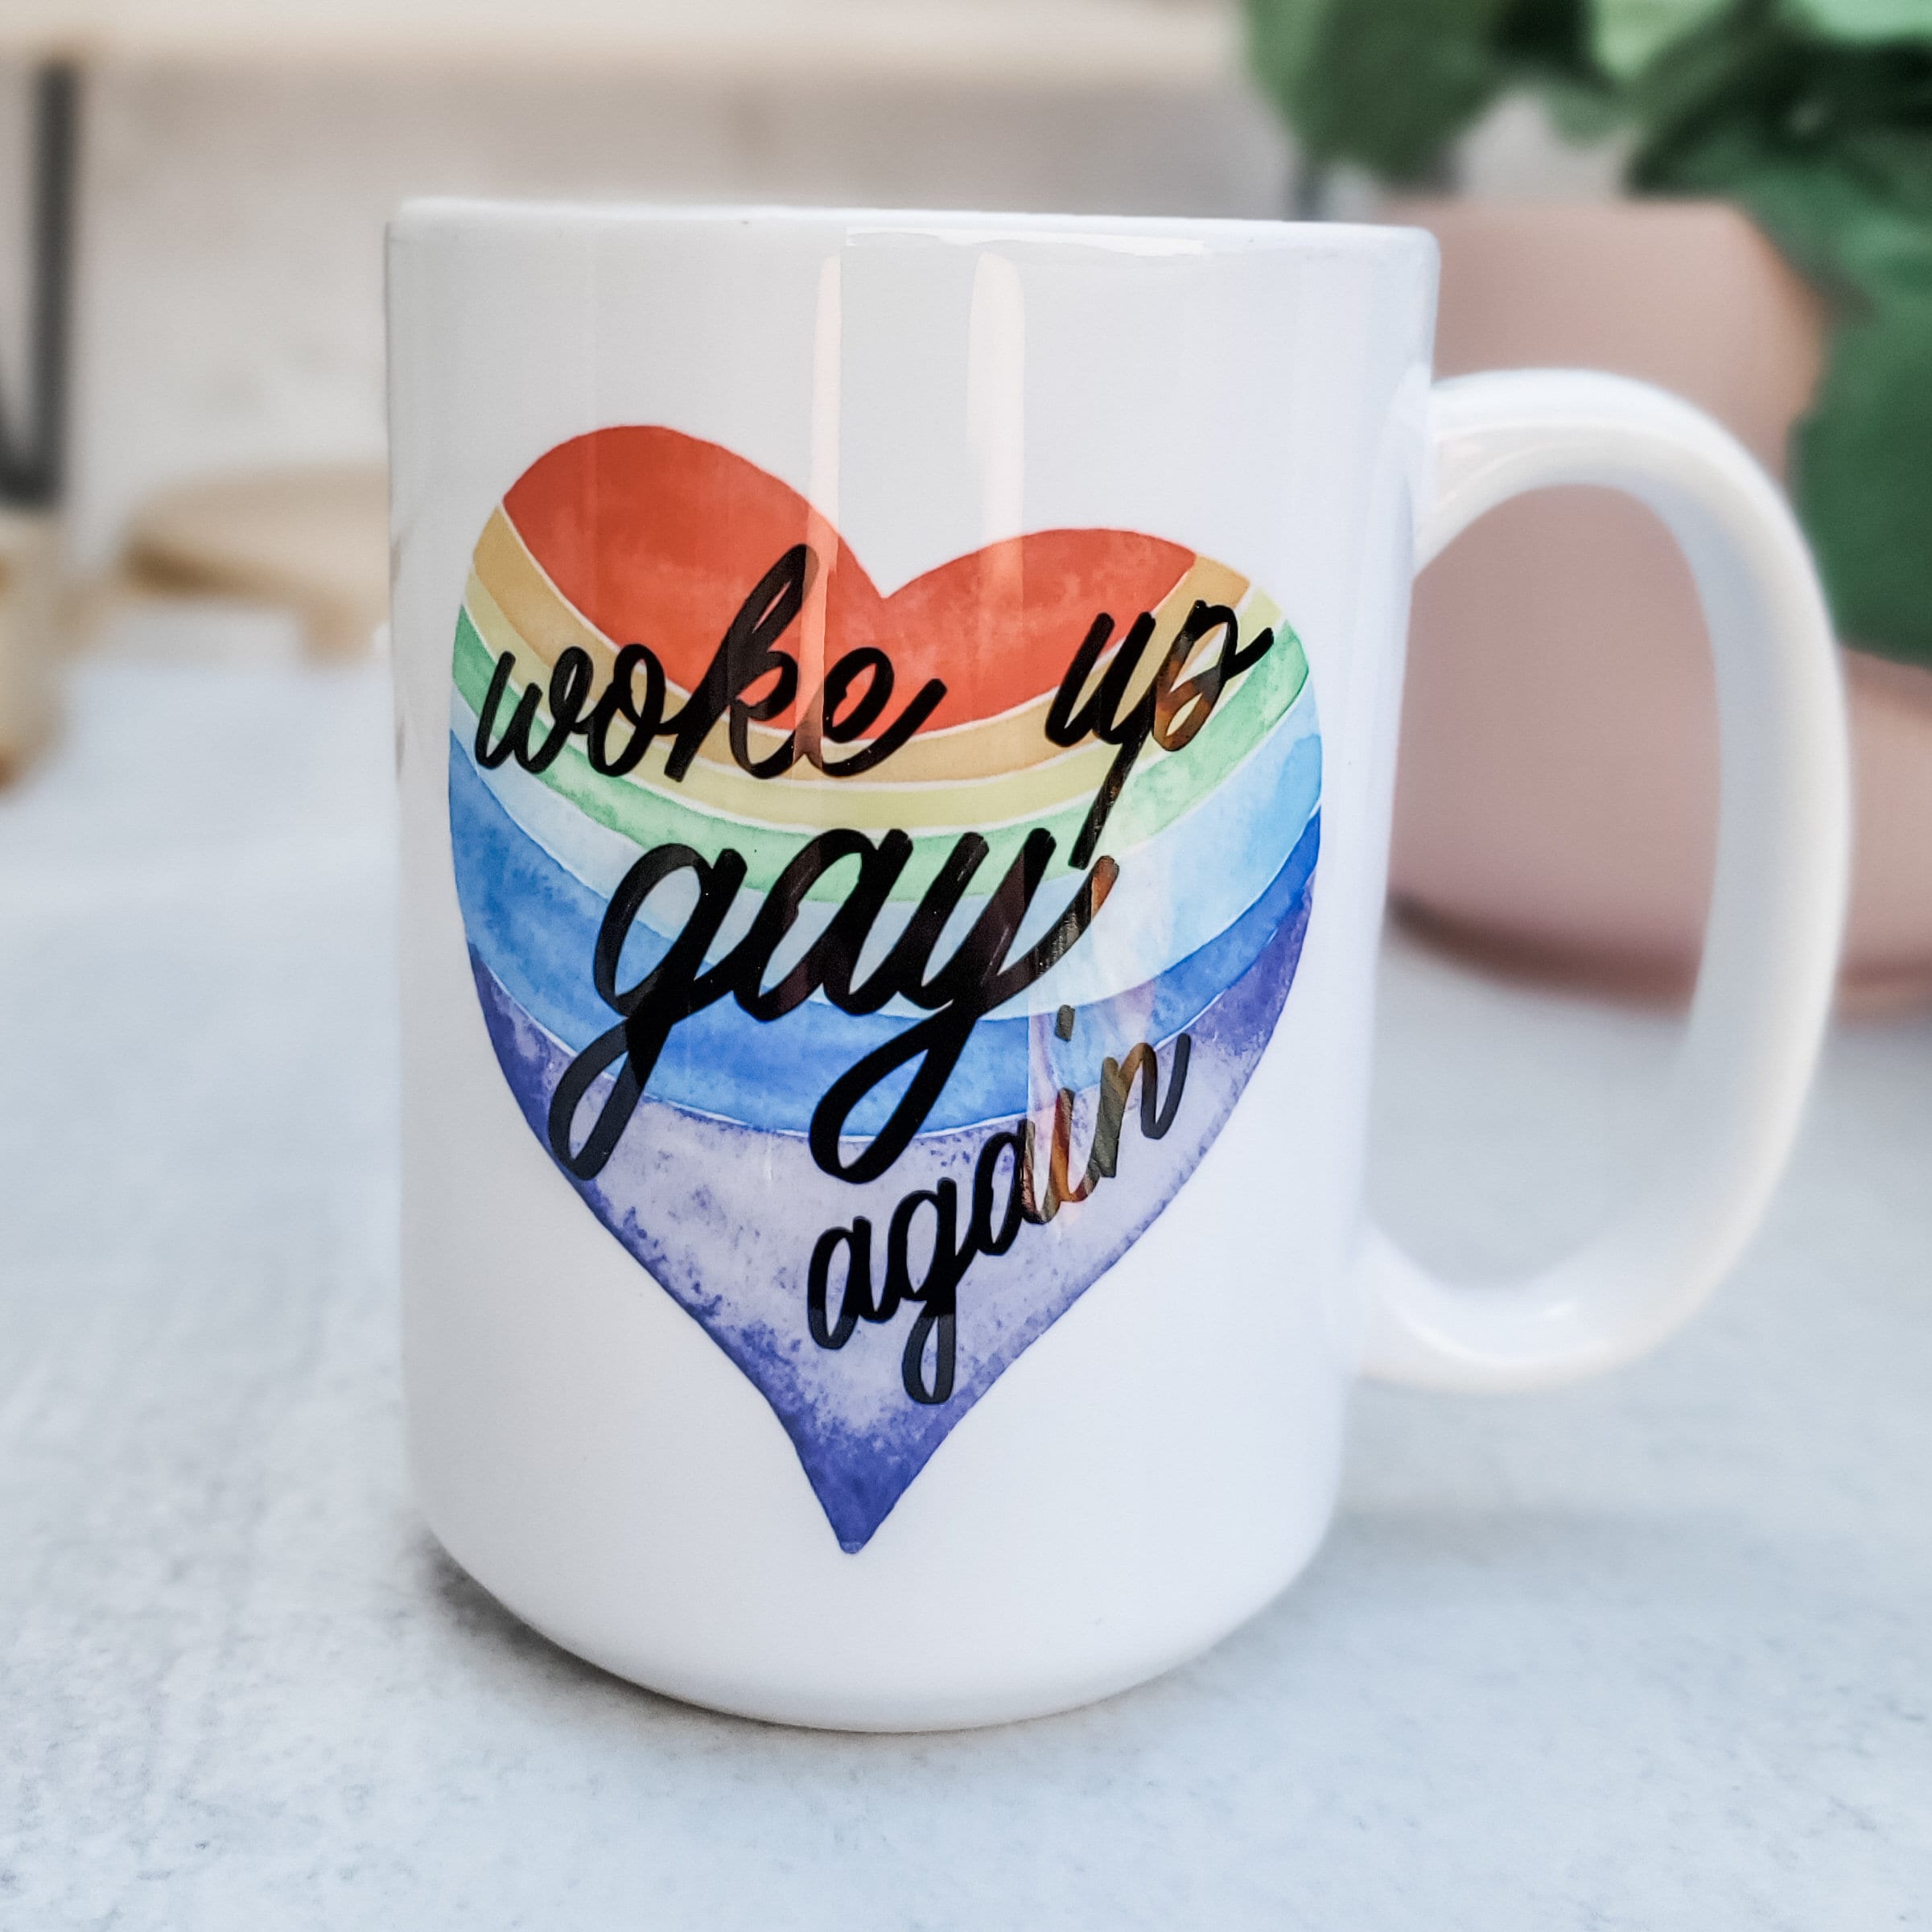 Woke Up Gay Again Coffee Mug - Funny Political PRIDE Coffee Cup for Work - Gift for LGBTQIA Friend - Pride Party Coffee Cup - Gay Home Decor